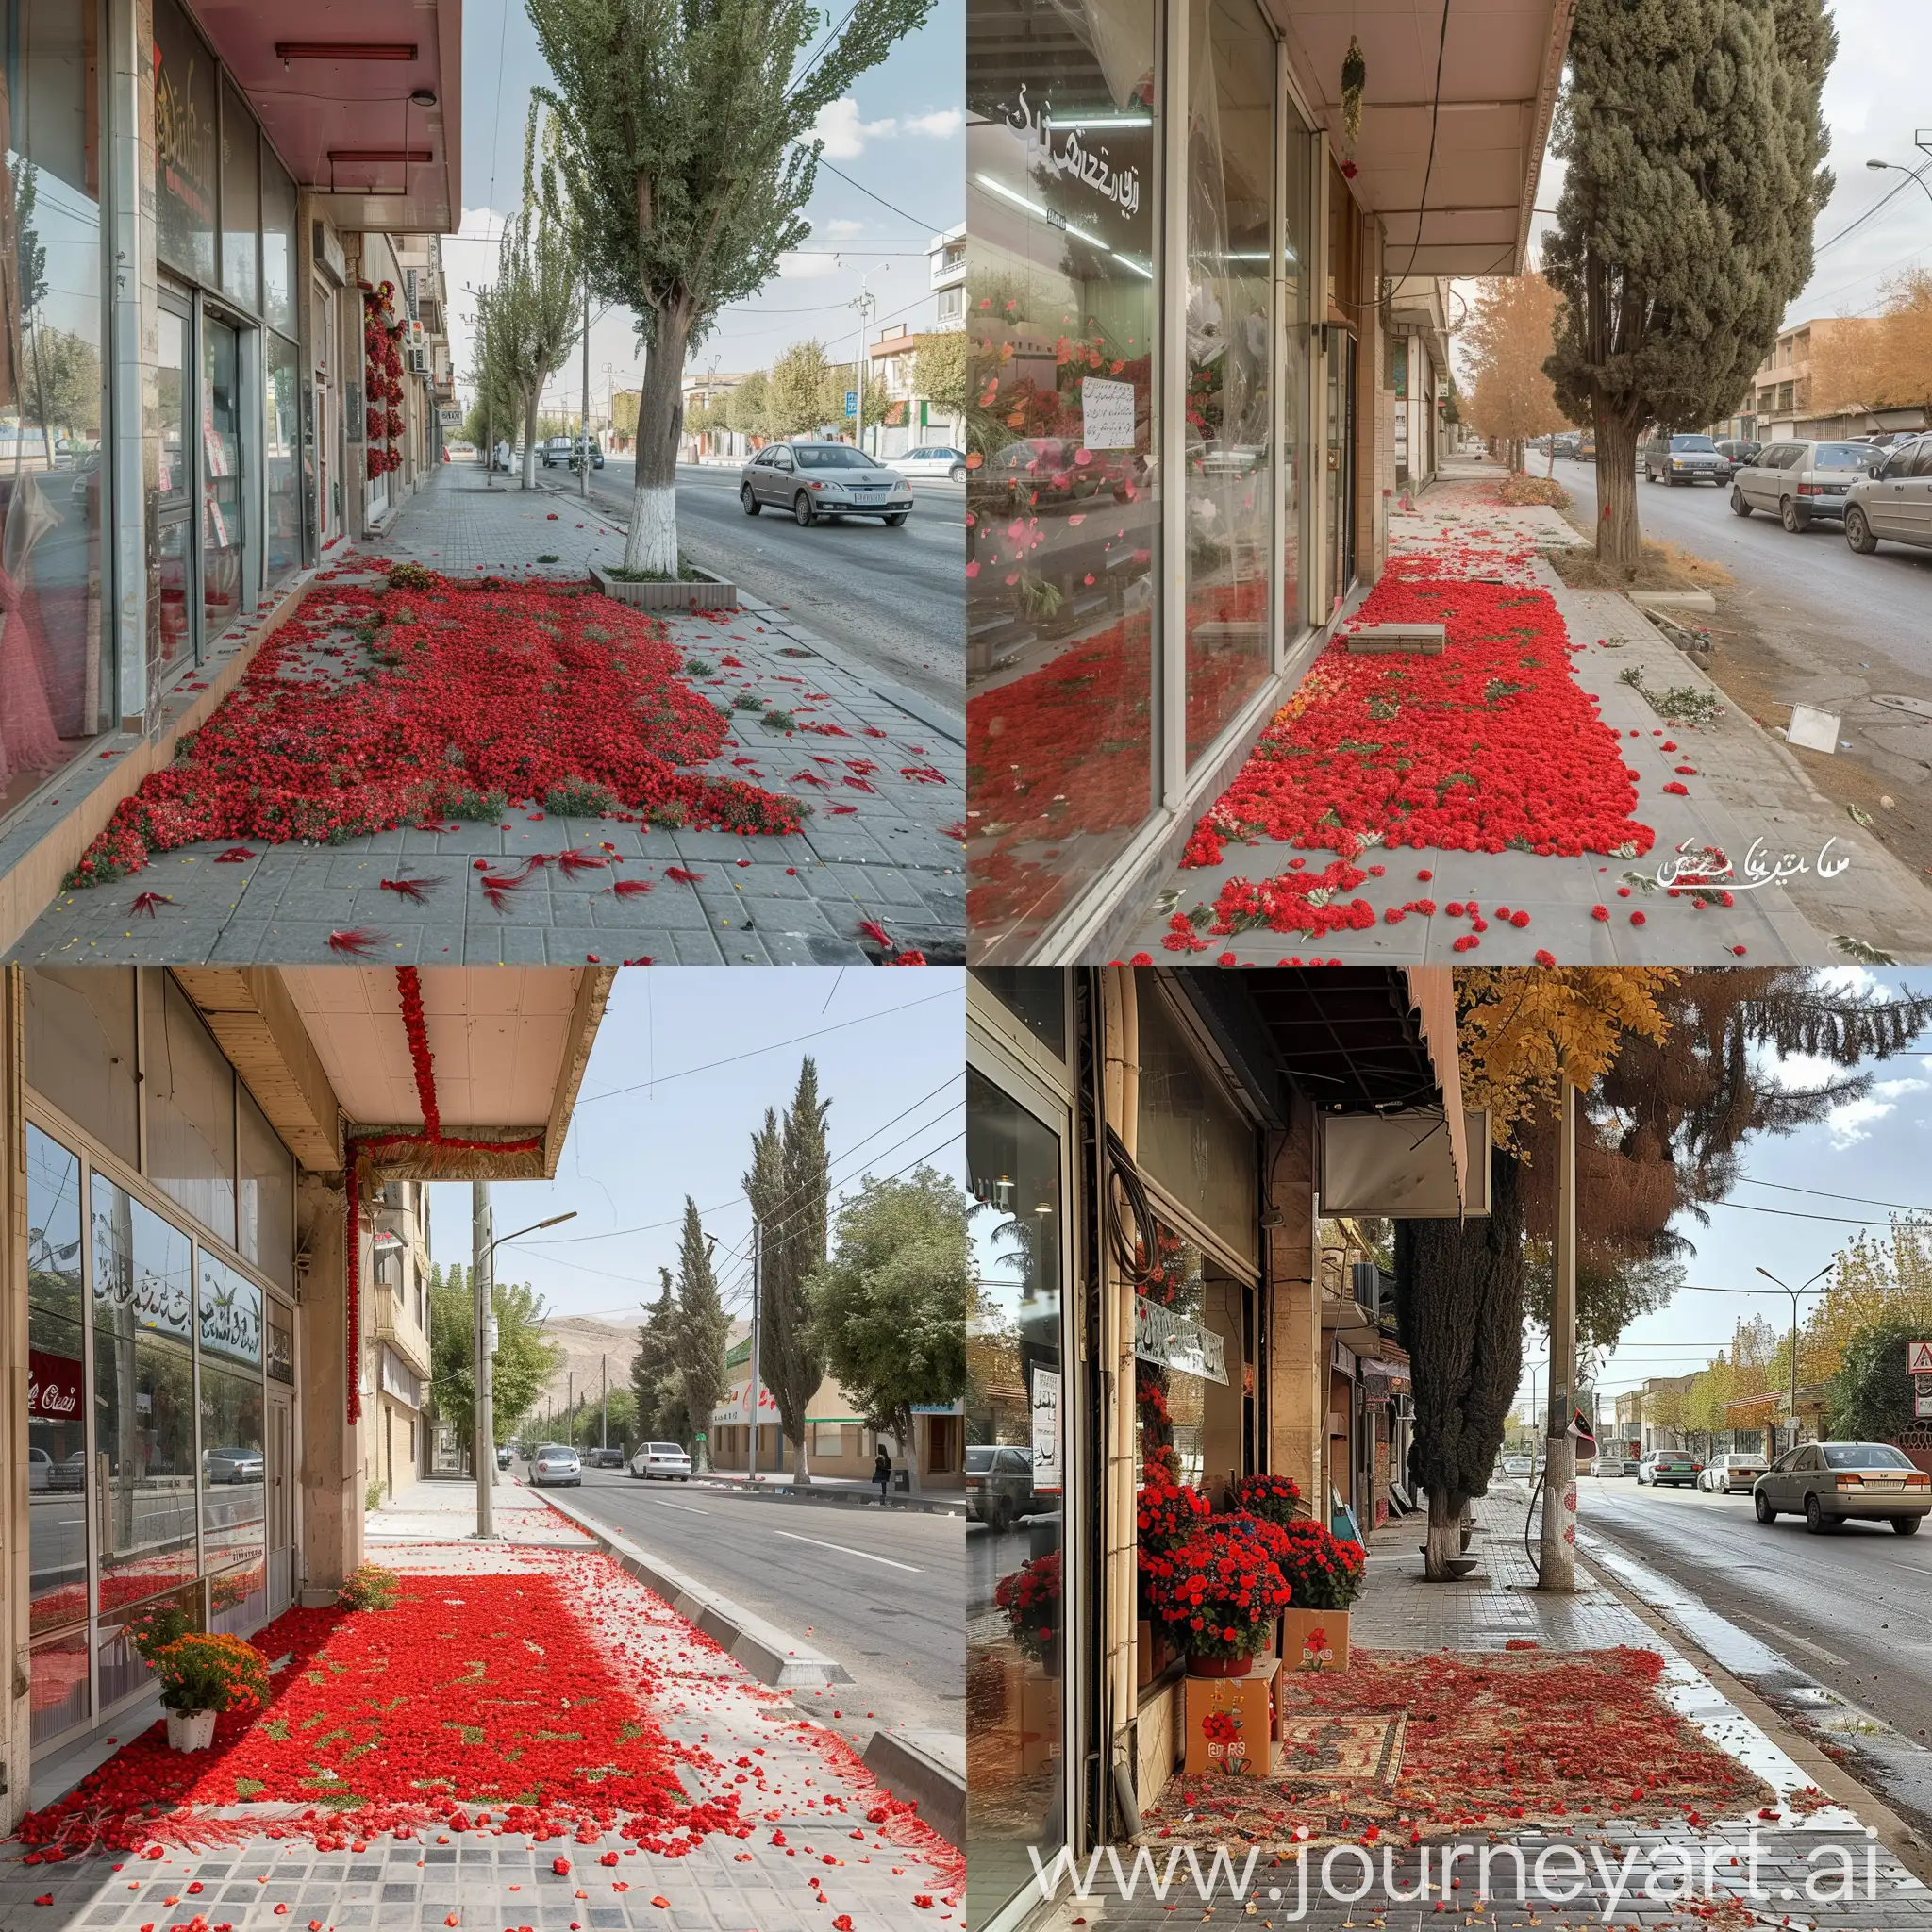 A flower shop on the side of Faculty Street in Urmia, Iran, where the distance between the shop and the street is the sidewalk, with red flowers that are full of flowers and small flower leaves are thrown on the ground and the floor is decorated. From this decoration, it is like a Qamzai carpet with flower feathers spread between the street and the shop, which is rectangular in shape, the width of the rectangle in front of the shop door. There is a tall tree every five to six meters on the sidewalk. We also have cars like Pride, Samand and Peugeot on the street.